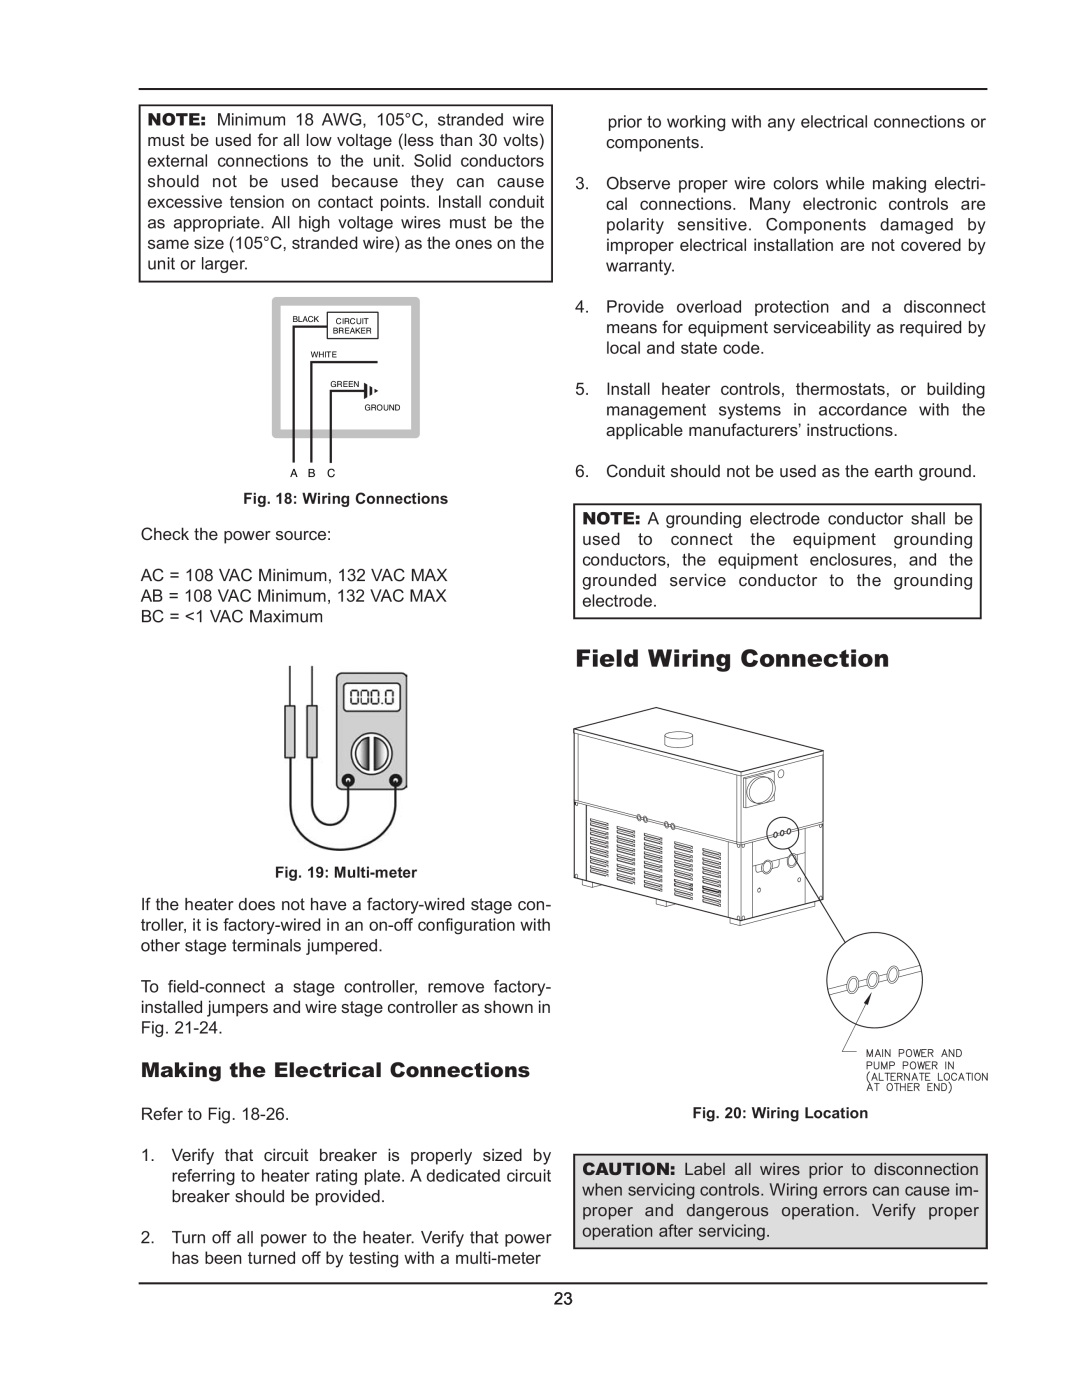 Raypak 992B manual Field Wiring Connection, Making the Electrical Connections 